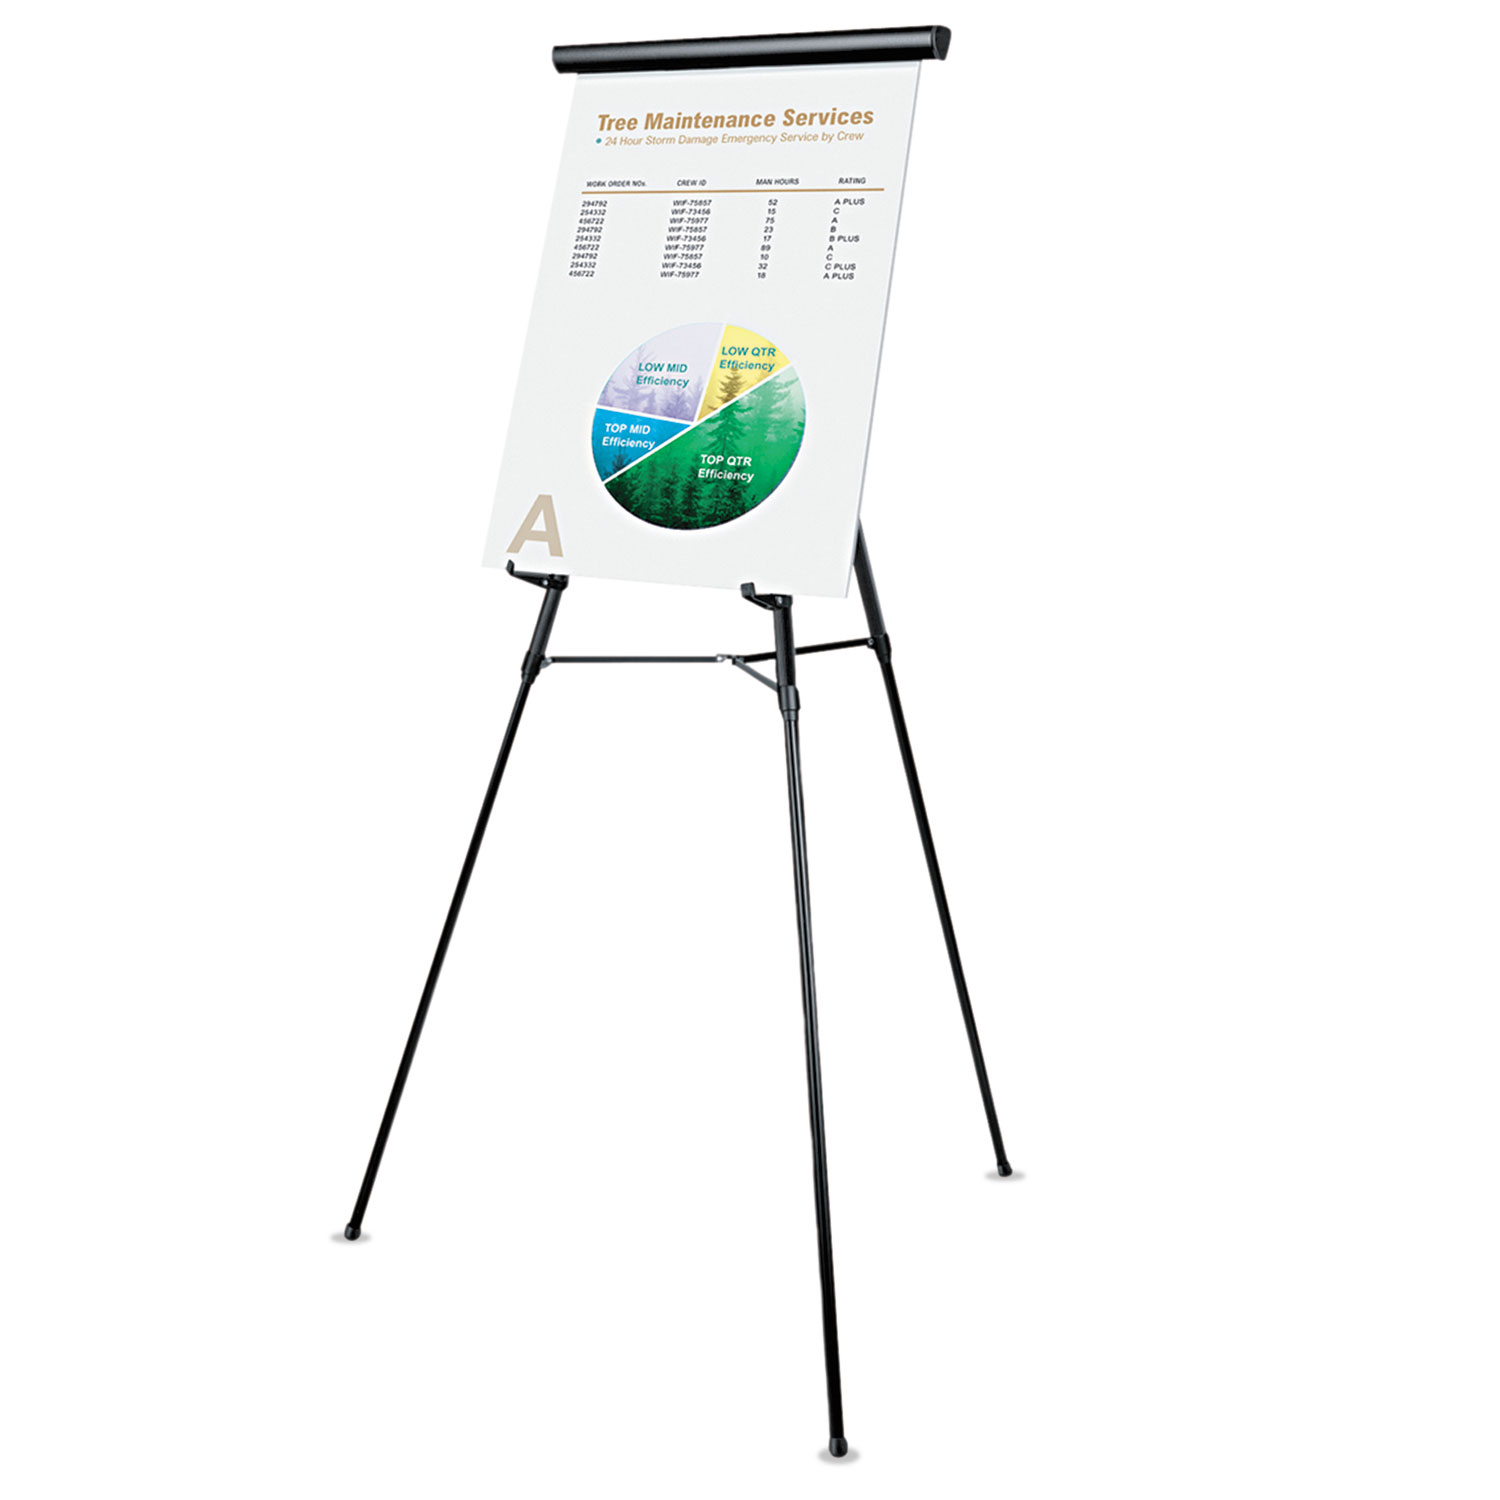  Universal UNV43150 3-Leg Telescoping Easel with Pad Retainer, Adjusts 34 to 64, Aluminum, Black (UNV43150) 